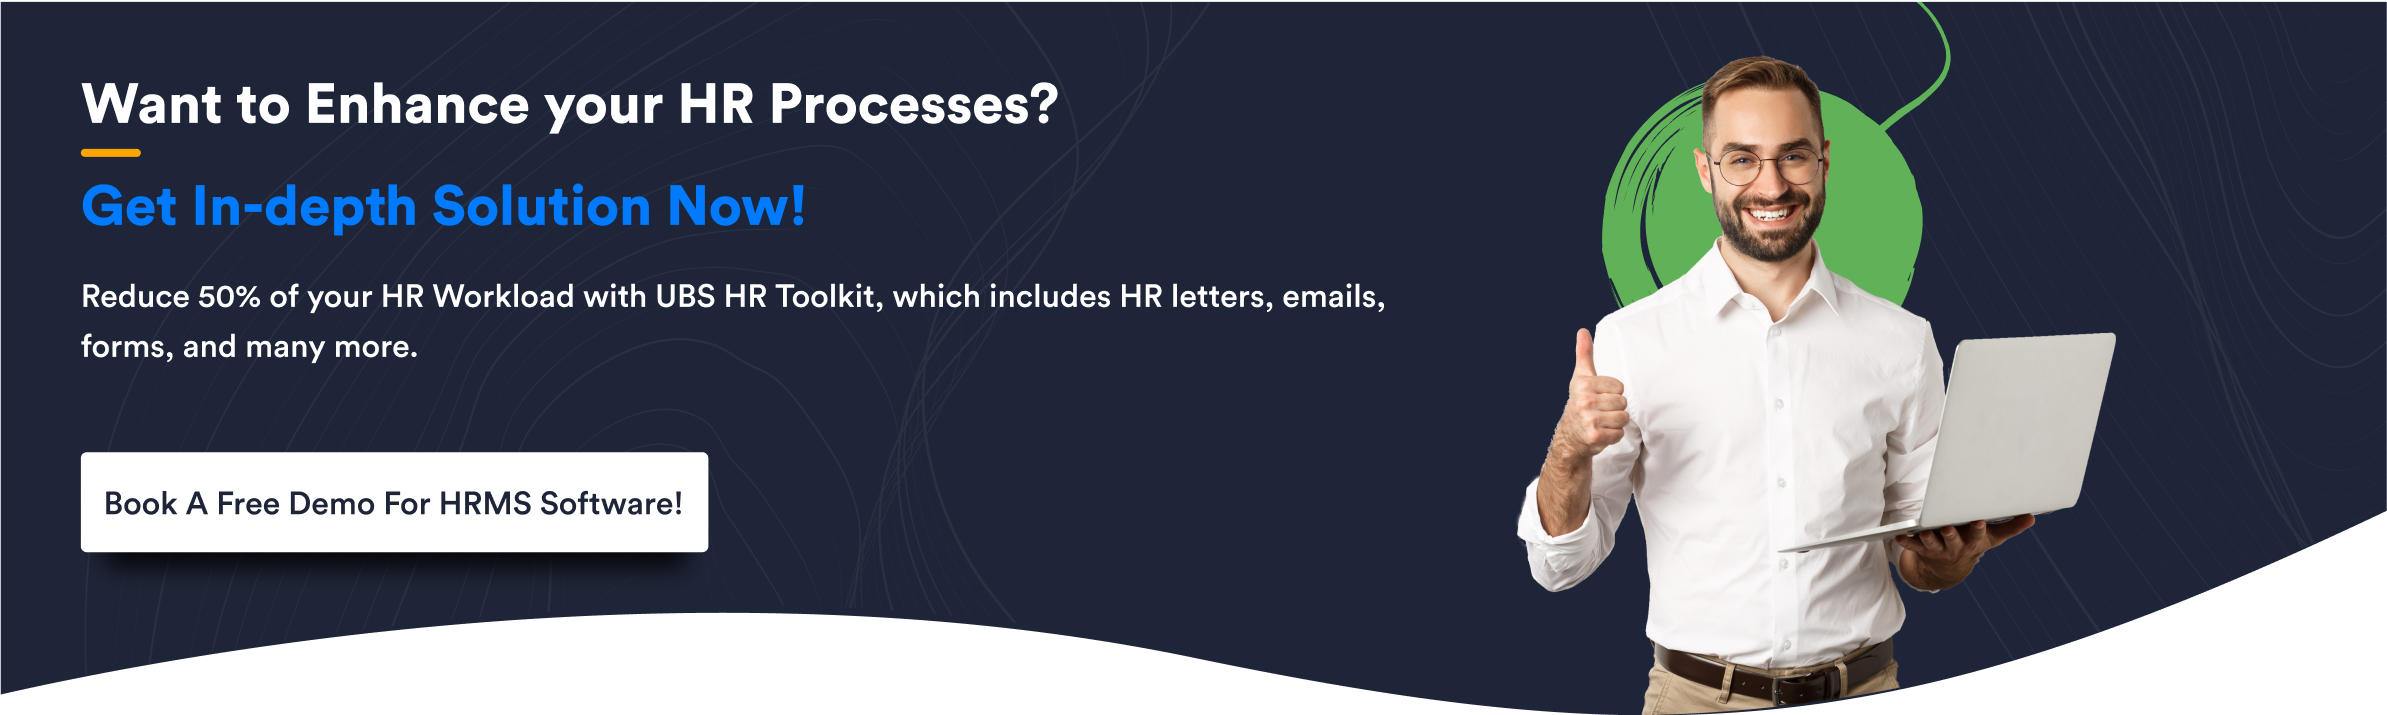 Want to Enhance your HR Processes Get In depth Solution Now 1